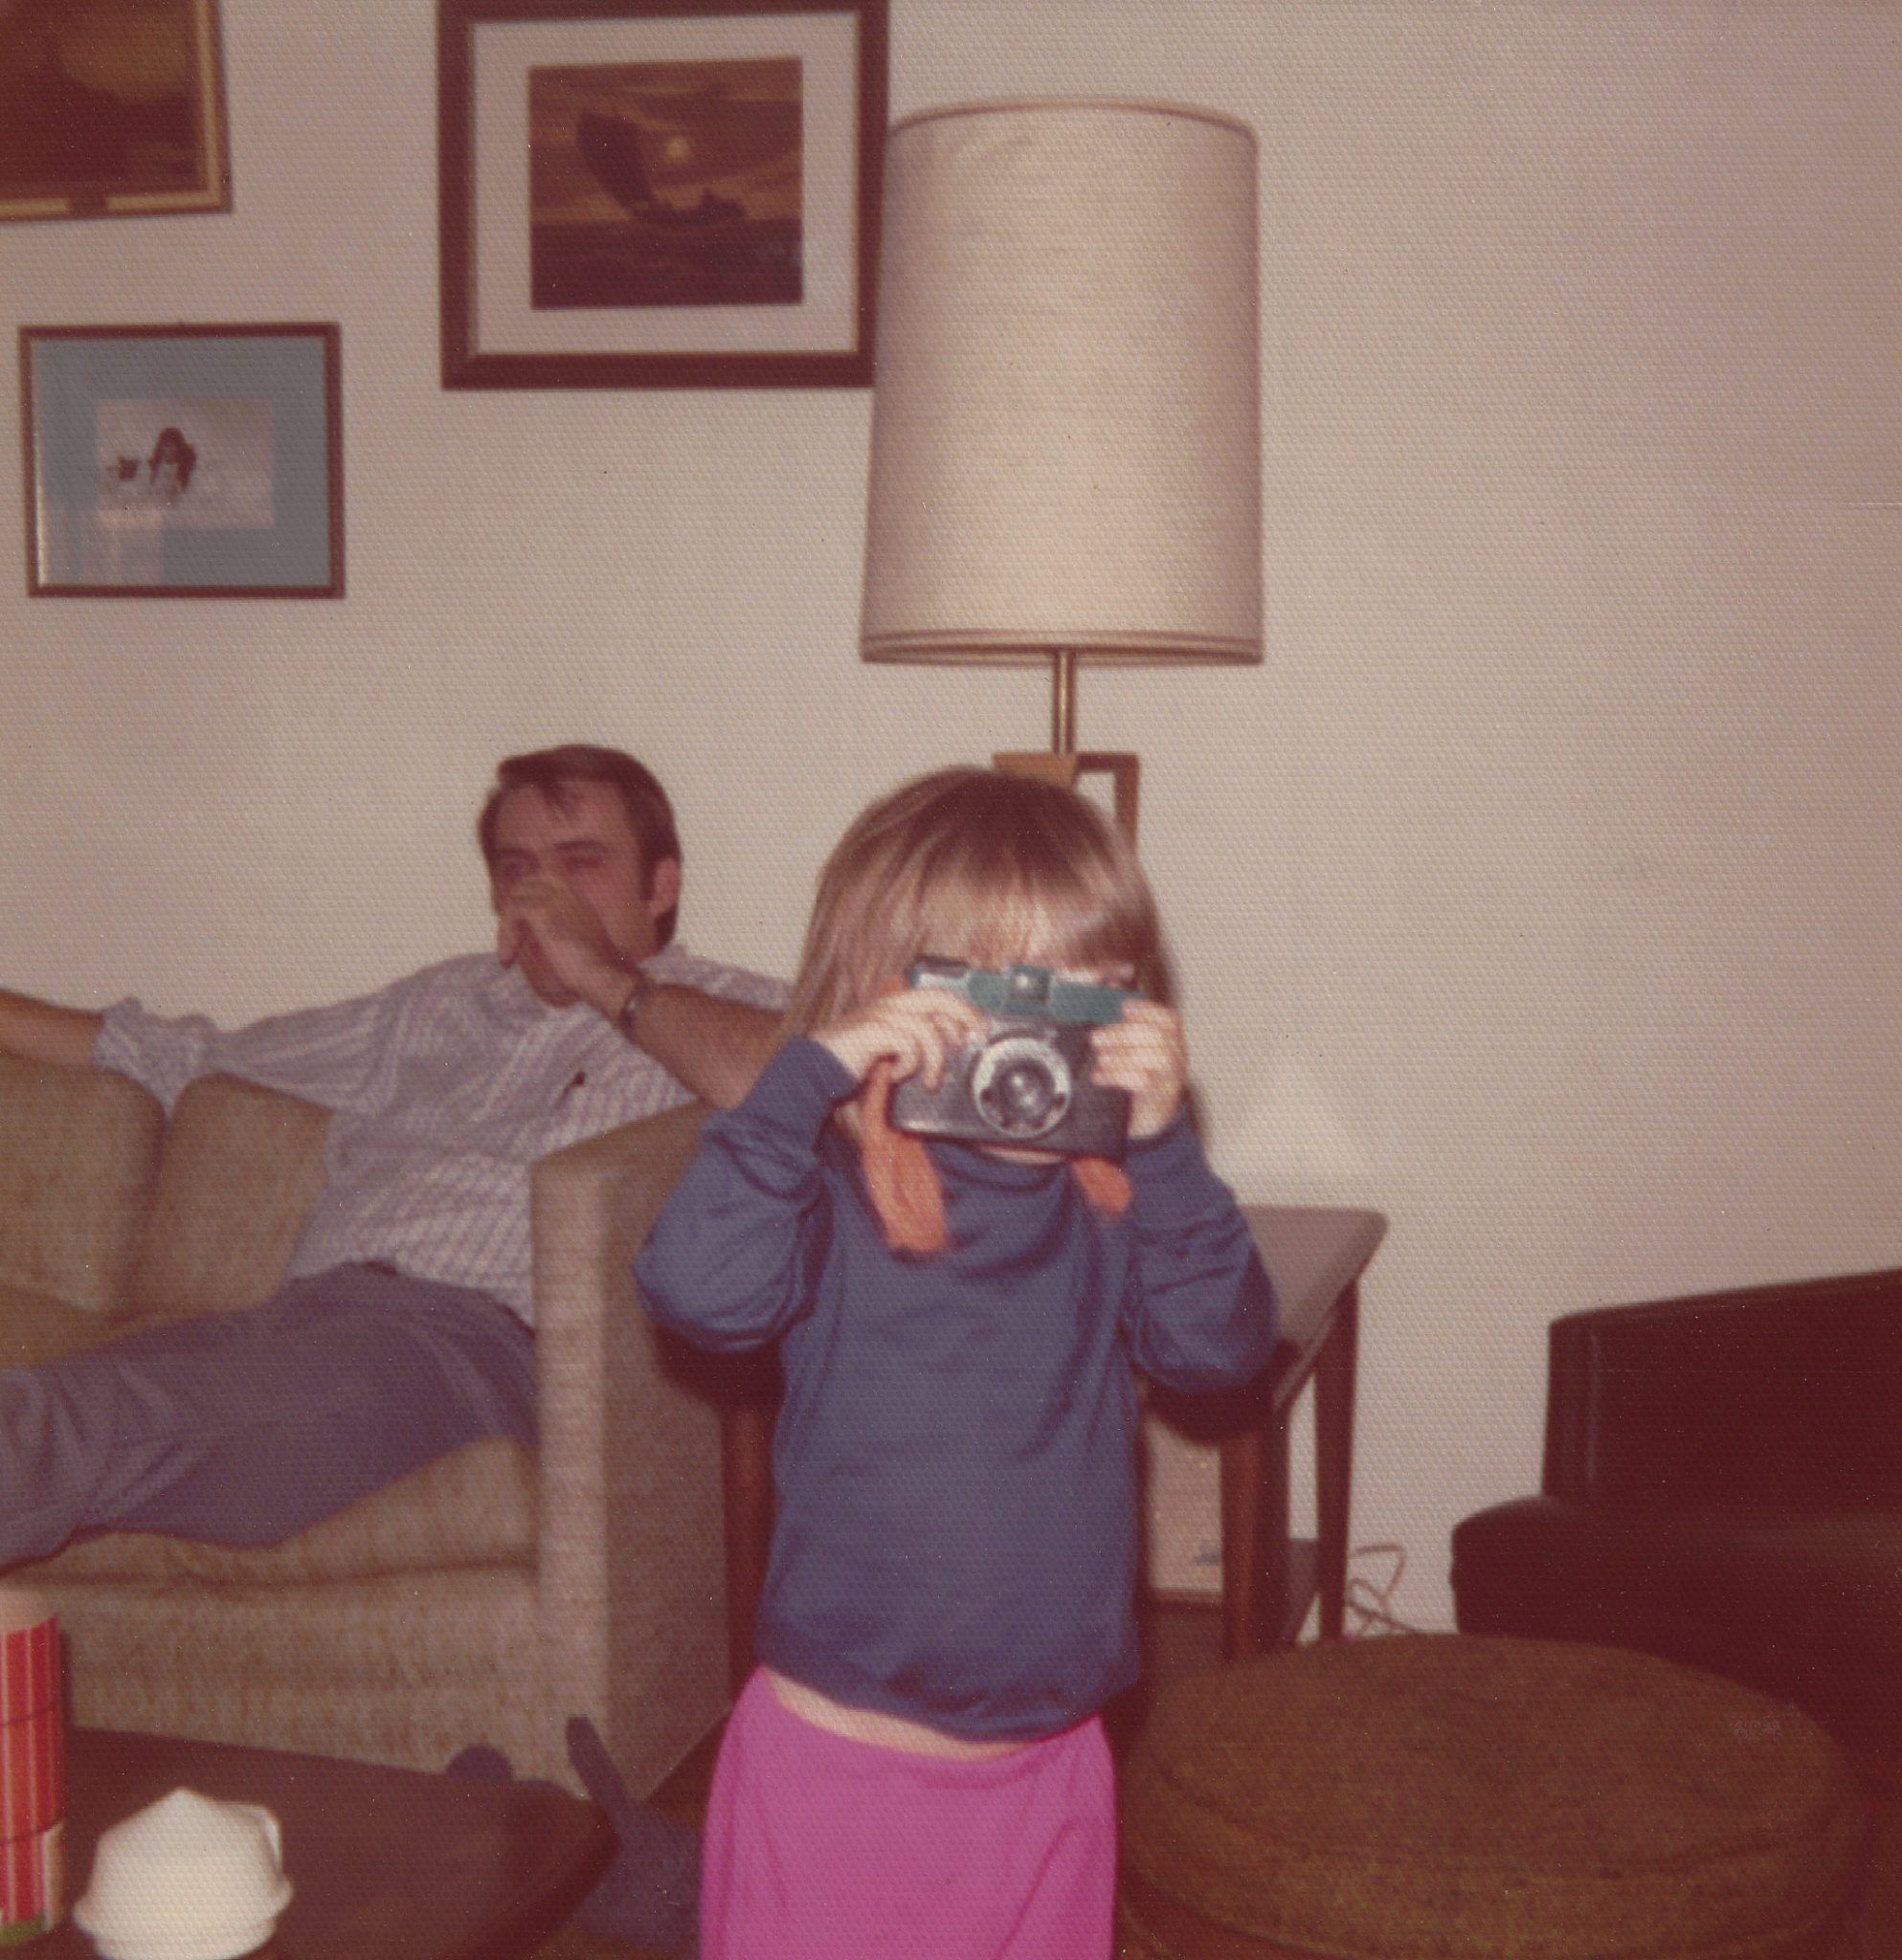 Hey Mom...Dad...Where's that Diana camera today?